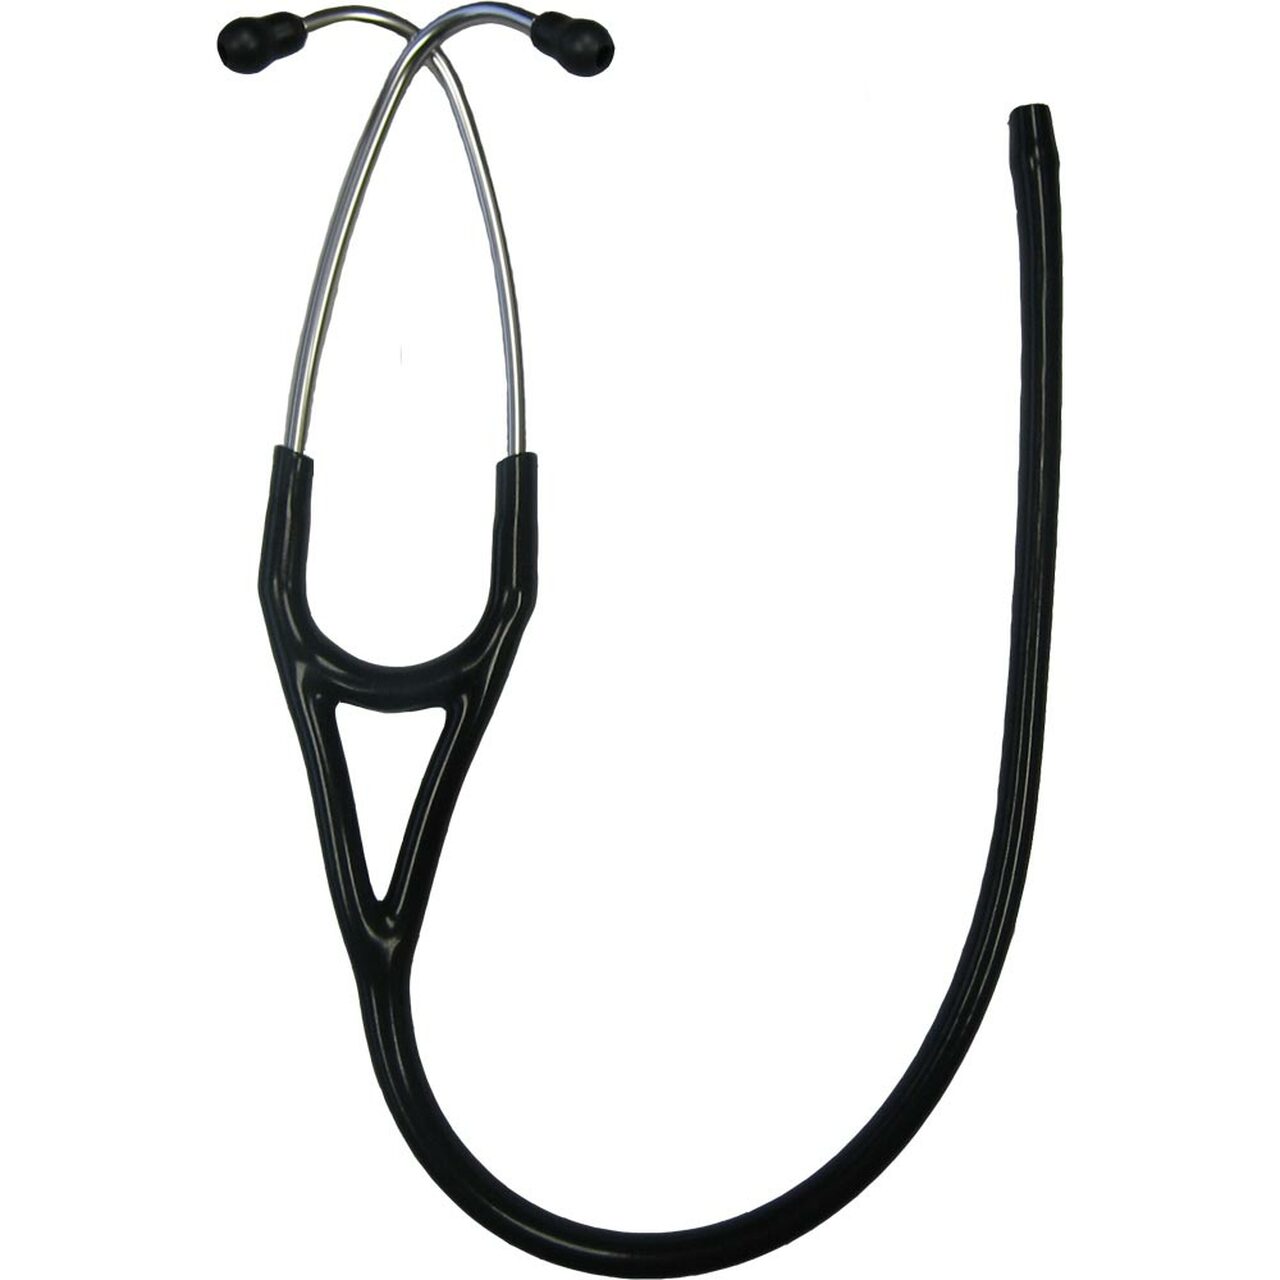 Cardiology IIl Replacement Tubing